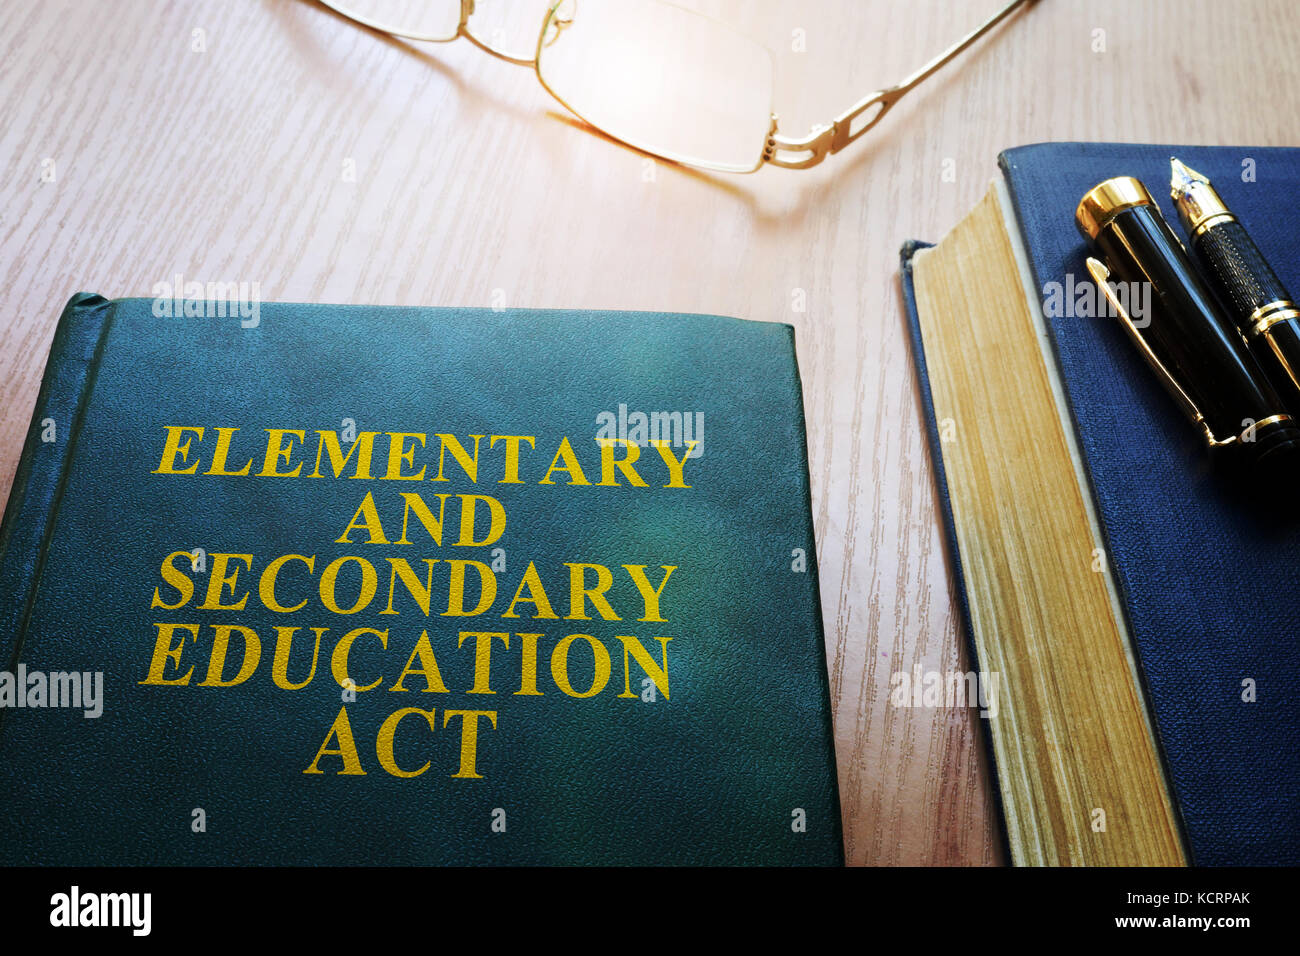 Elementary and Secondary Education Act of 1965 (ESEA) on a desk. Stock Photo